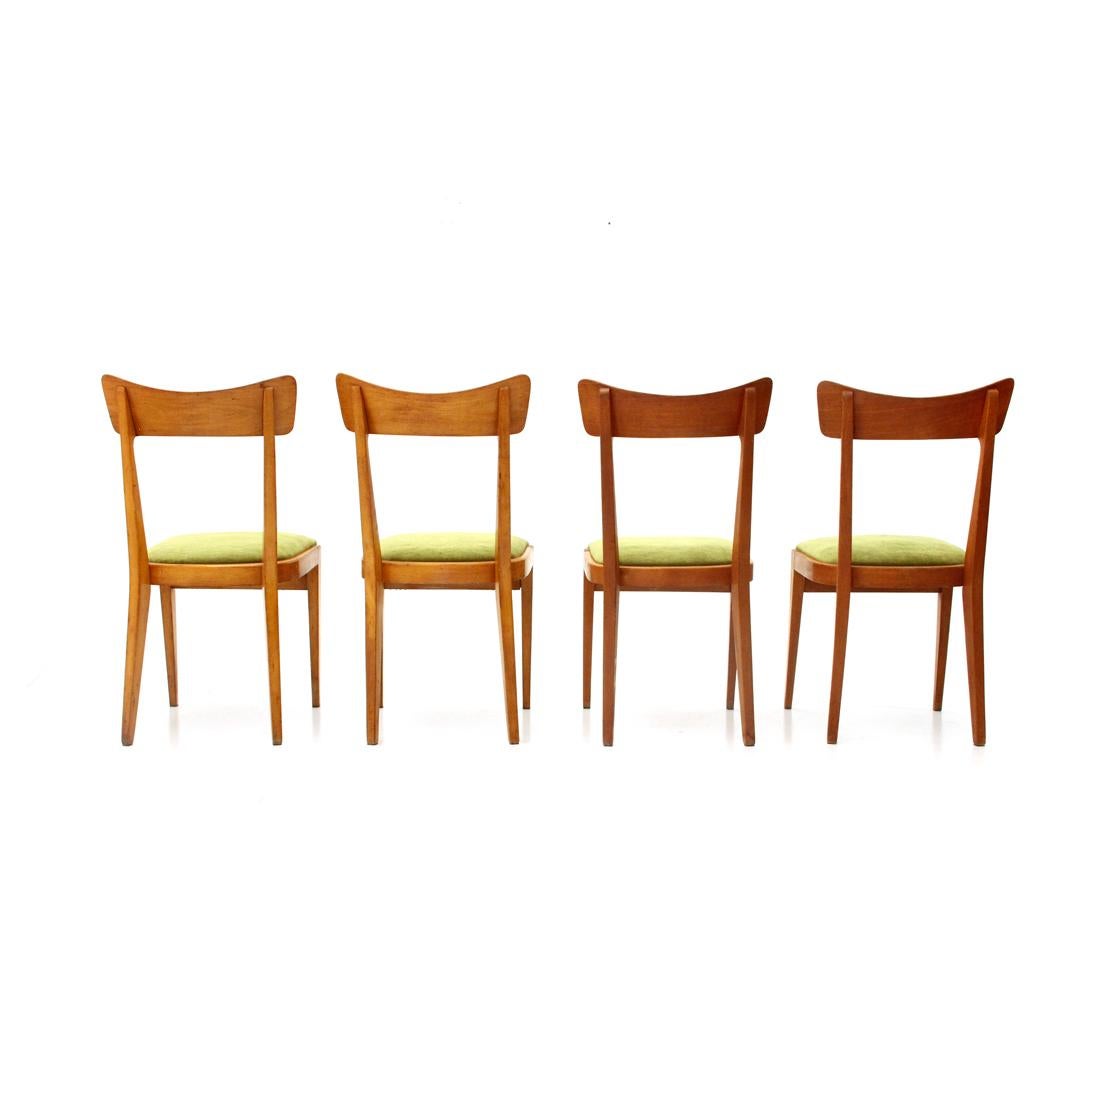 Mid-20th Century 4 Midcentury Green Velvet and Wood Italian Dining Chairs, 1950s